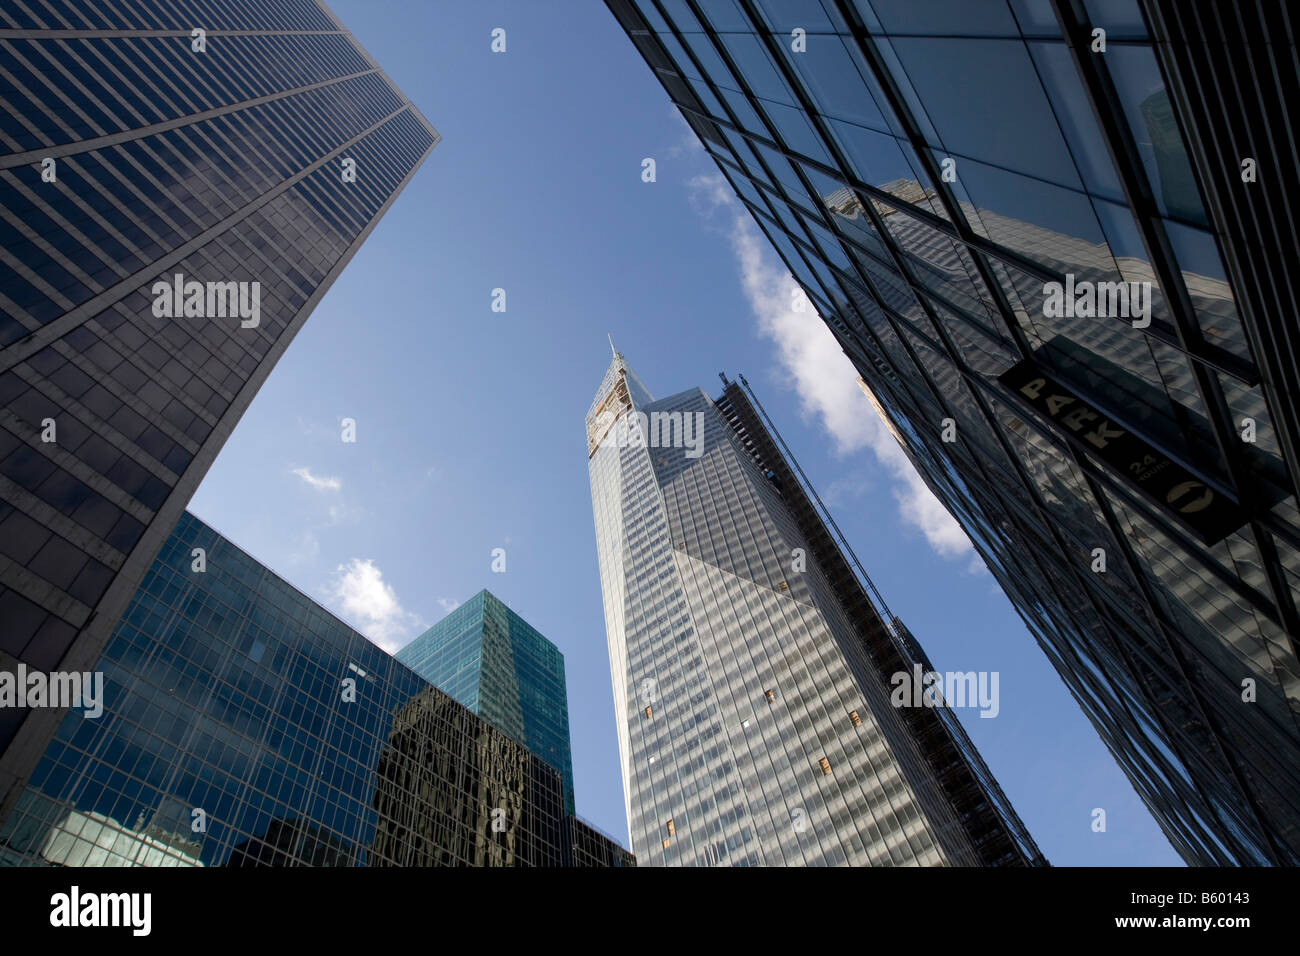 View of new Bank of America Tower under construction at One Bryant Park on Sixth Avenue between 42nd and 43rd Street in New York USA November 2008 Stock Photo